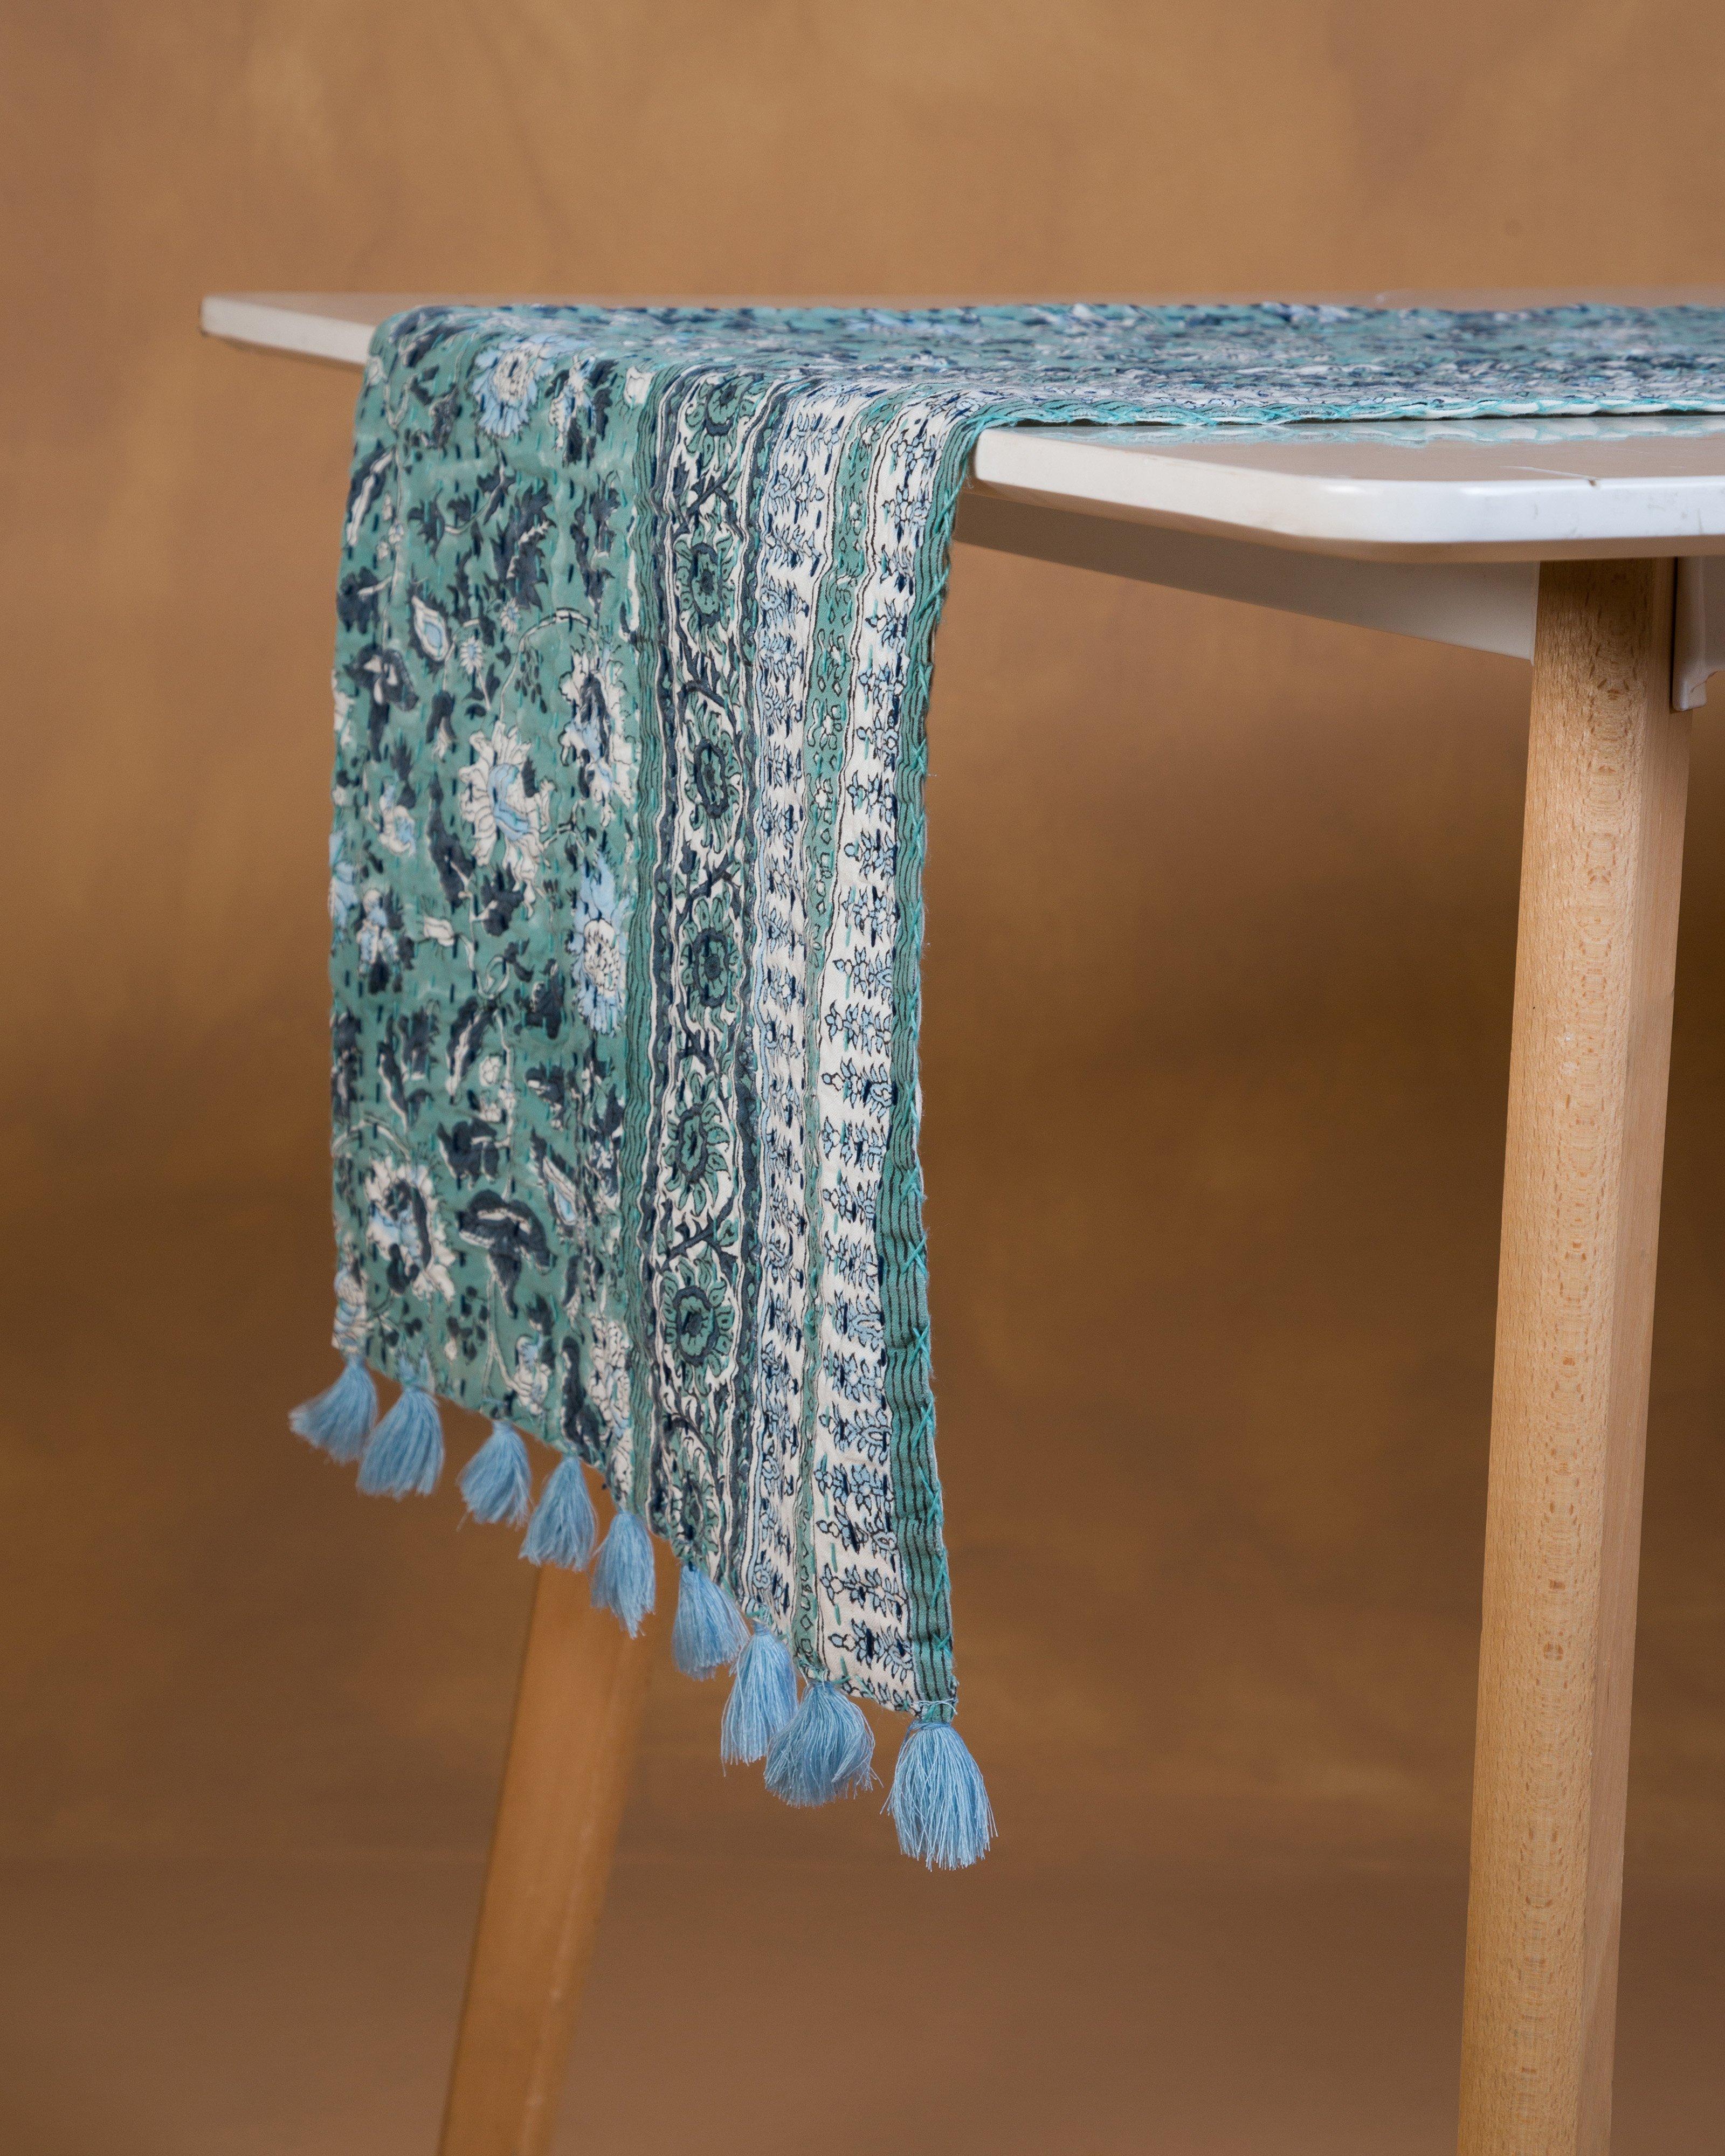 Block Print Table Runner with Kantha Stitch -  Blue